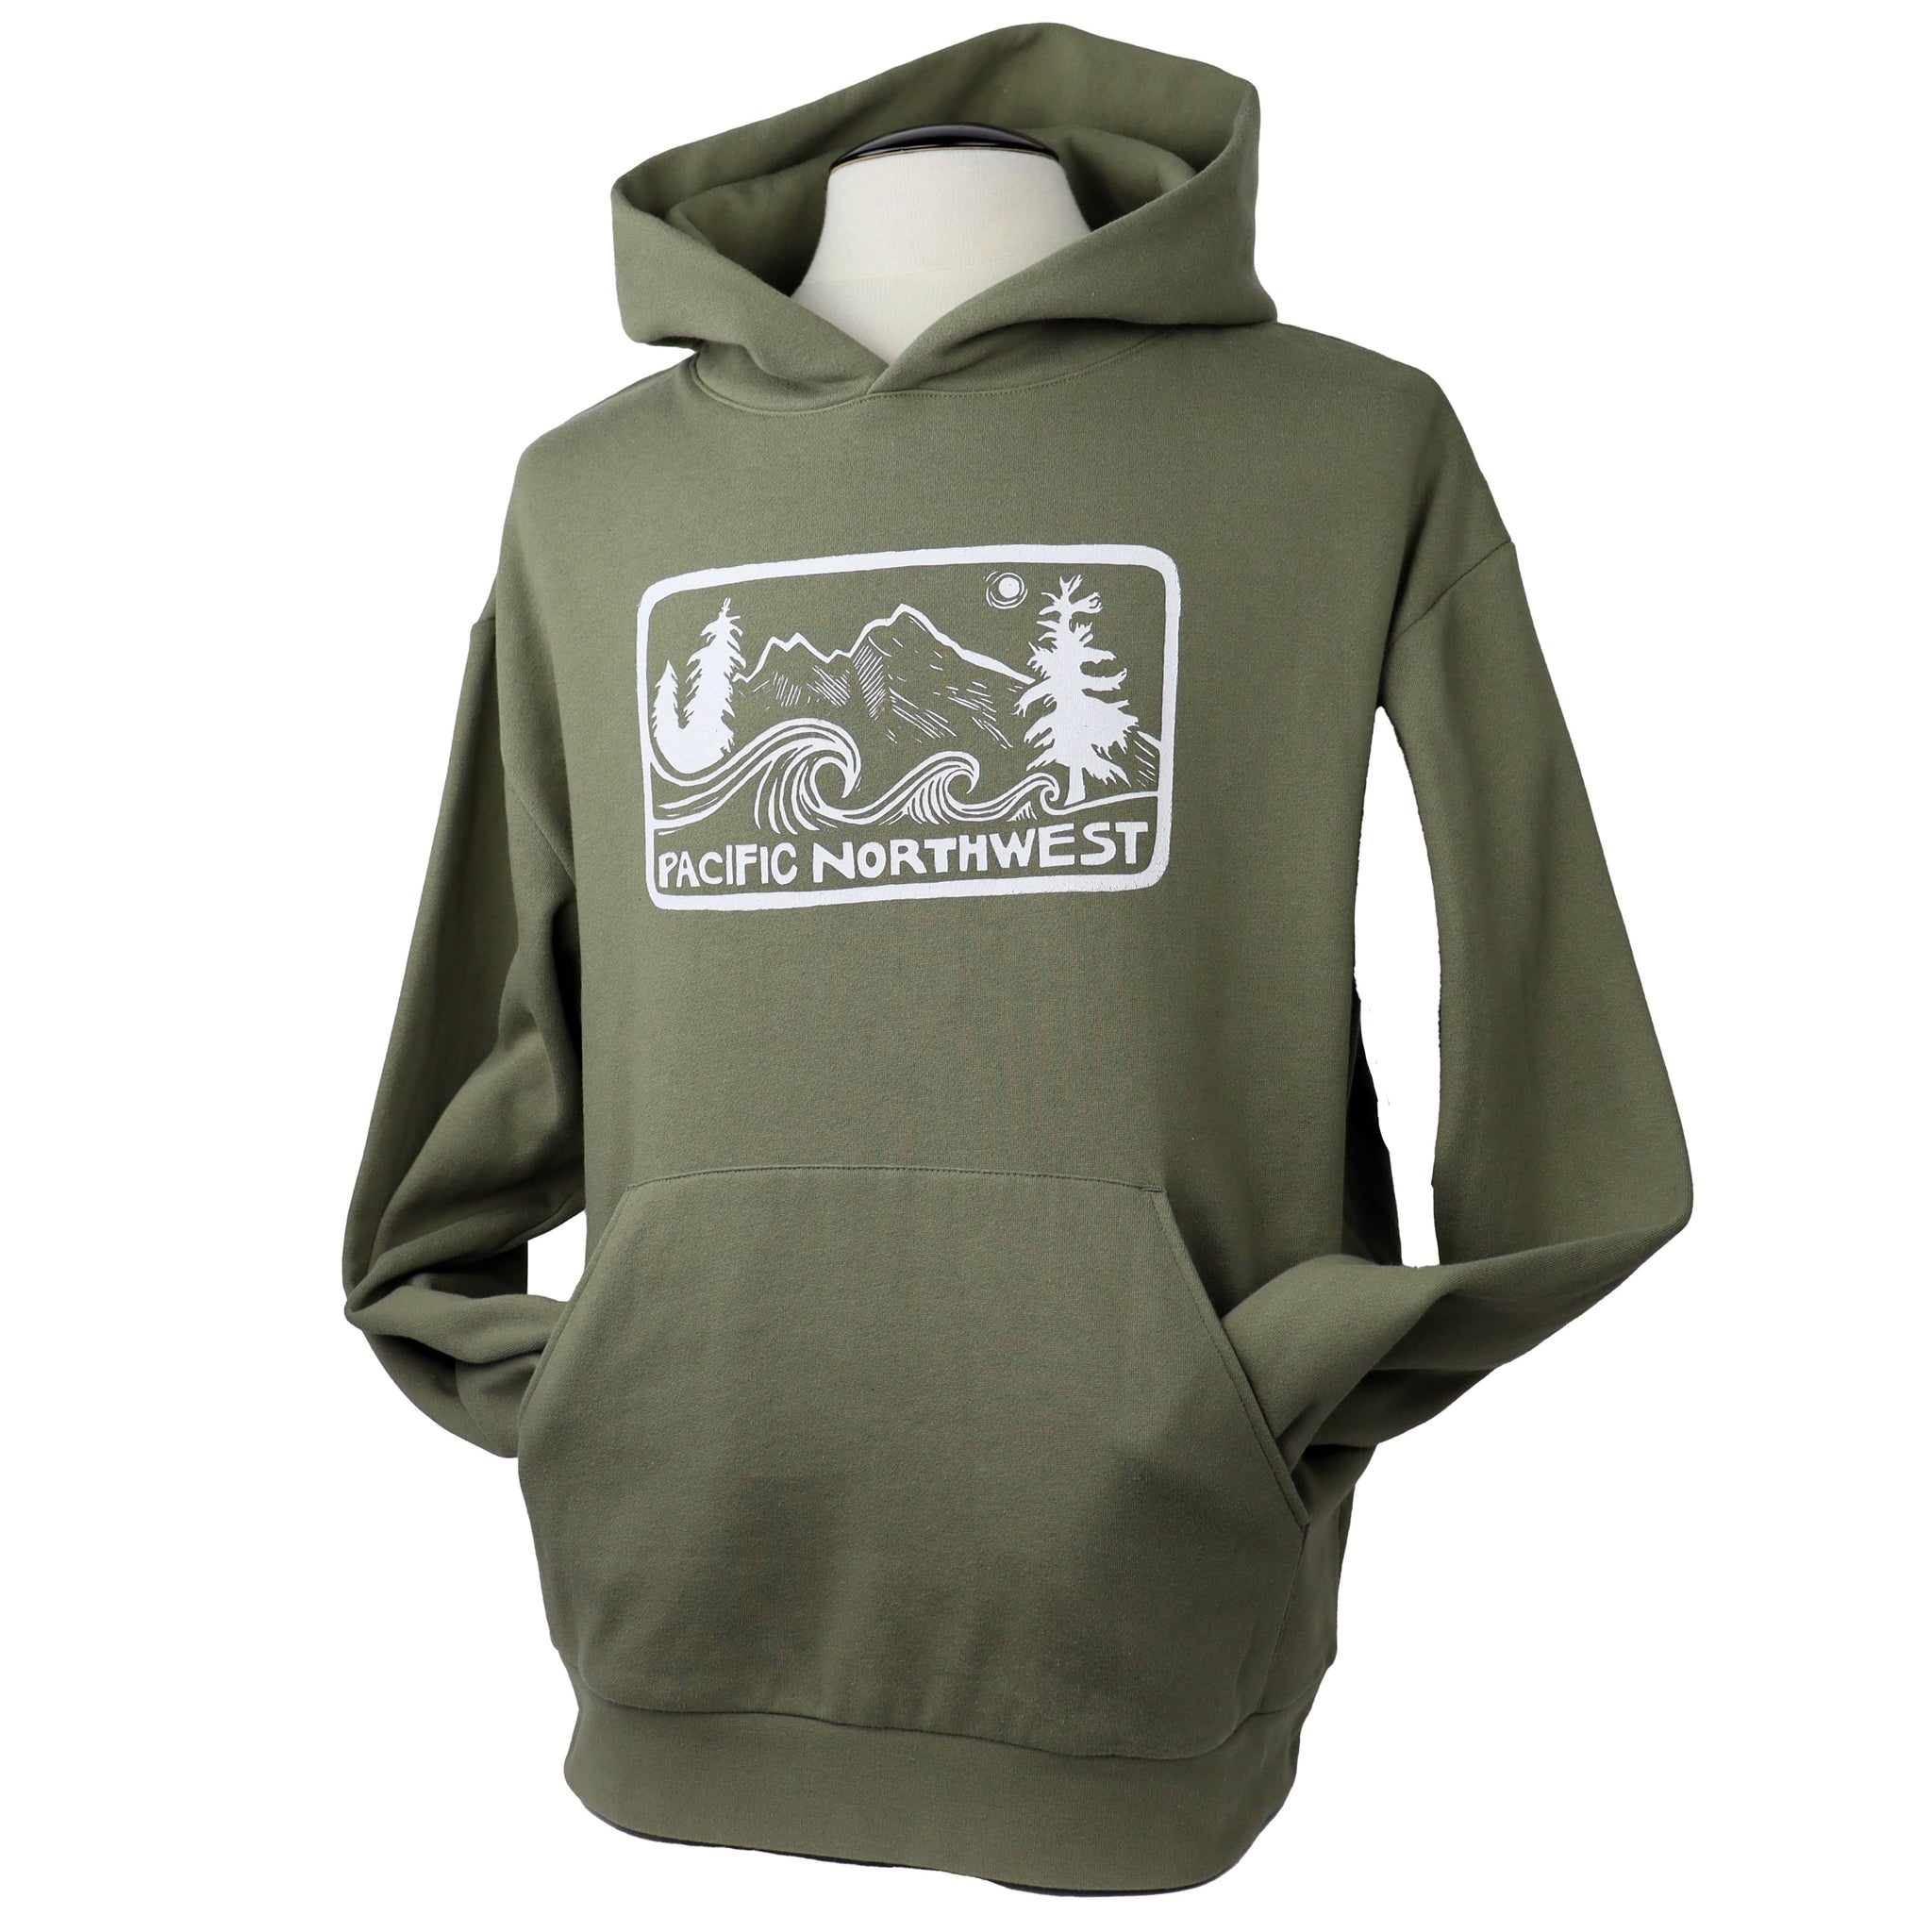 Pacific Northwest 2.0 Unisex Midweight Hoodie in Olive